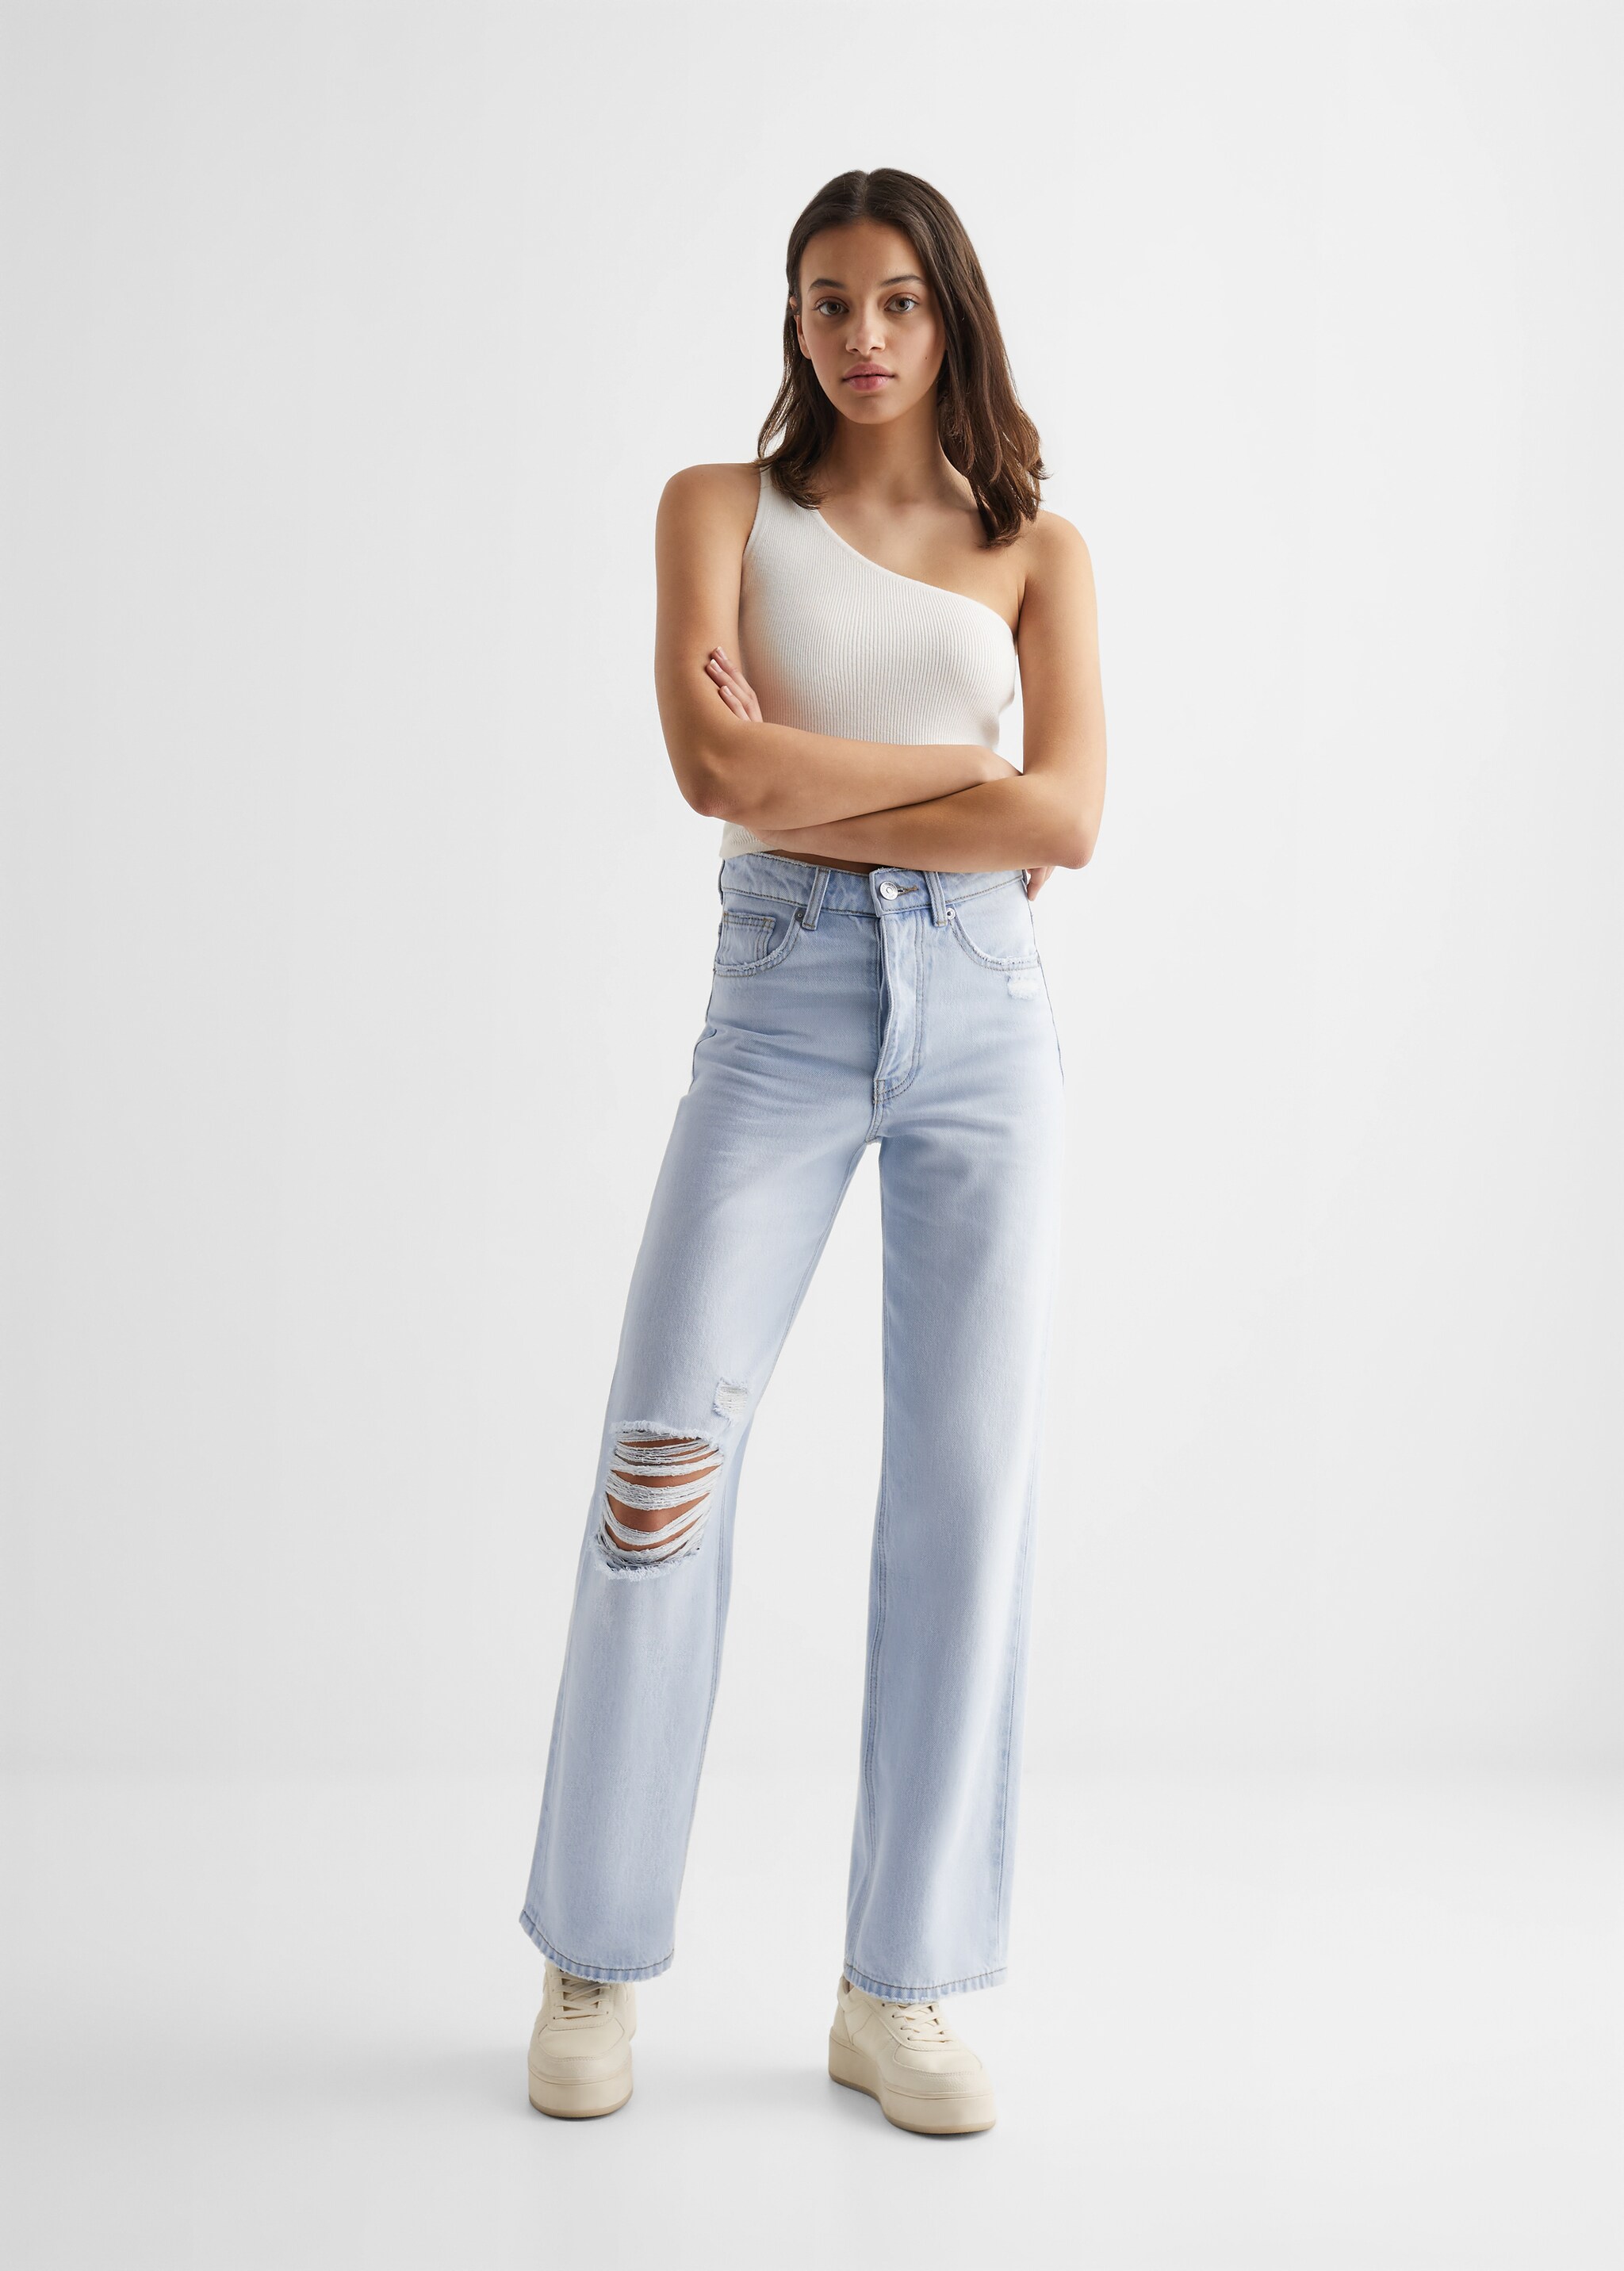 Decorative ripped wideleg jeans - General plane